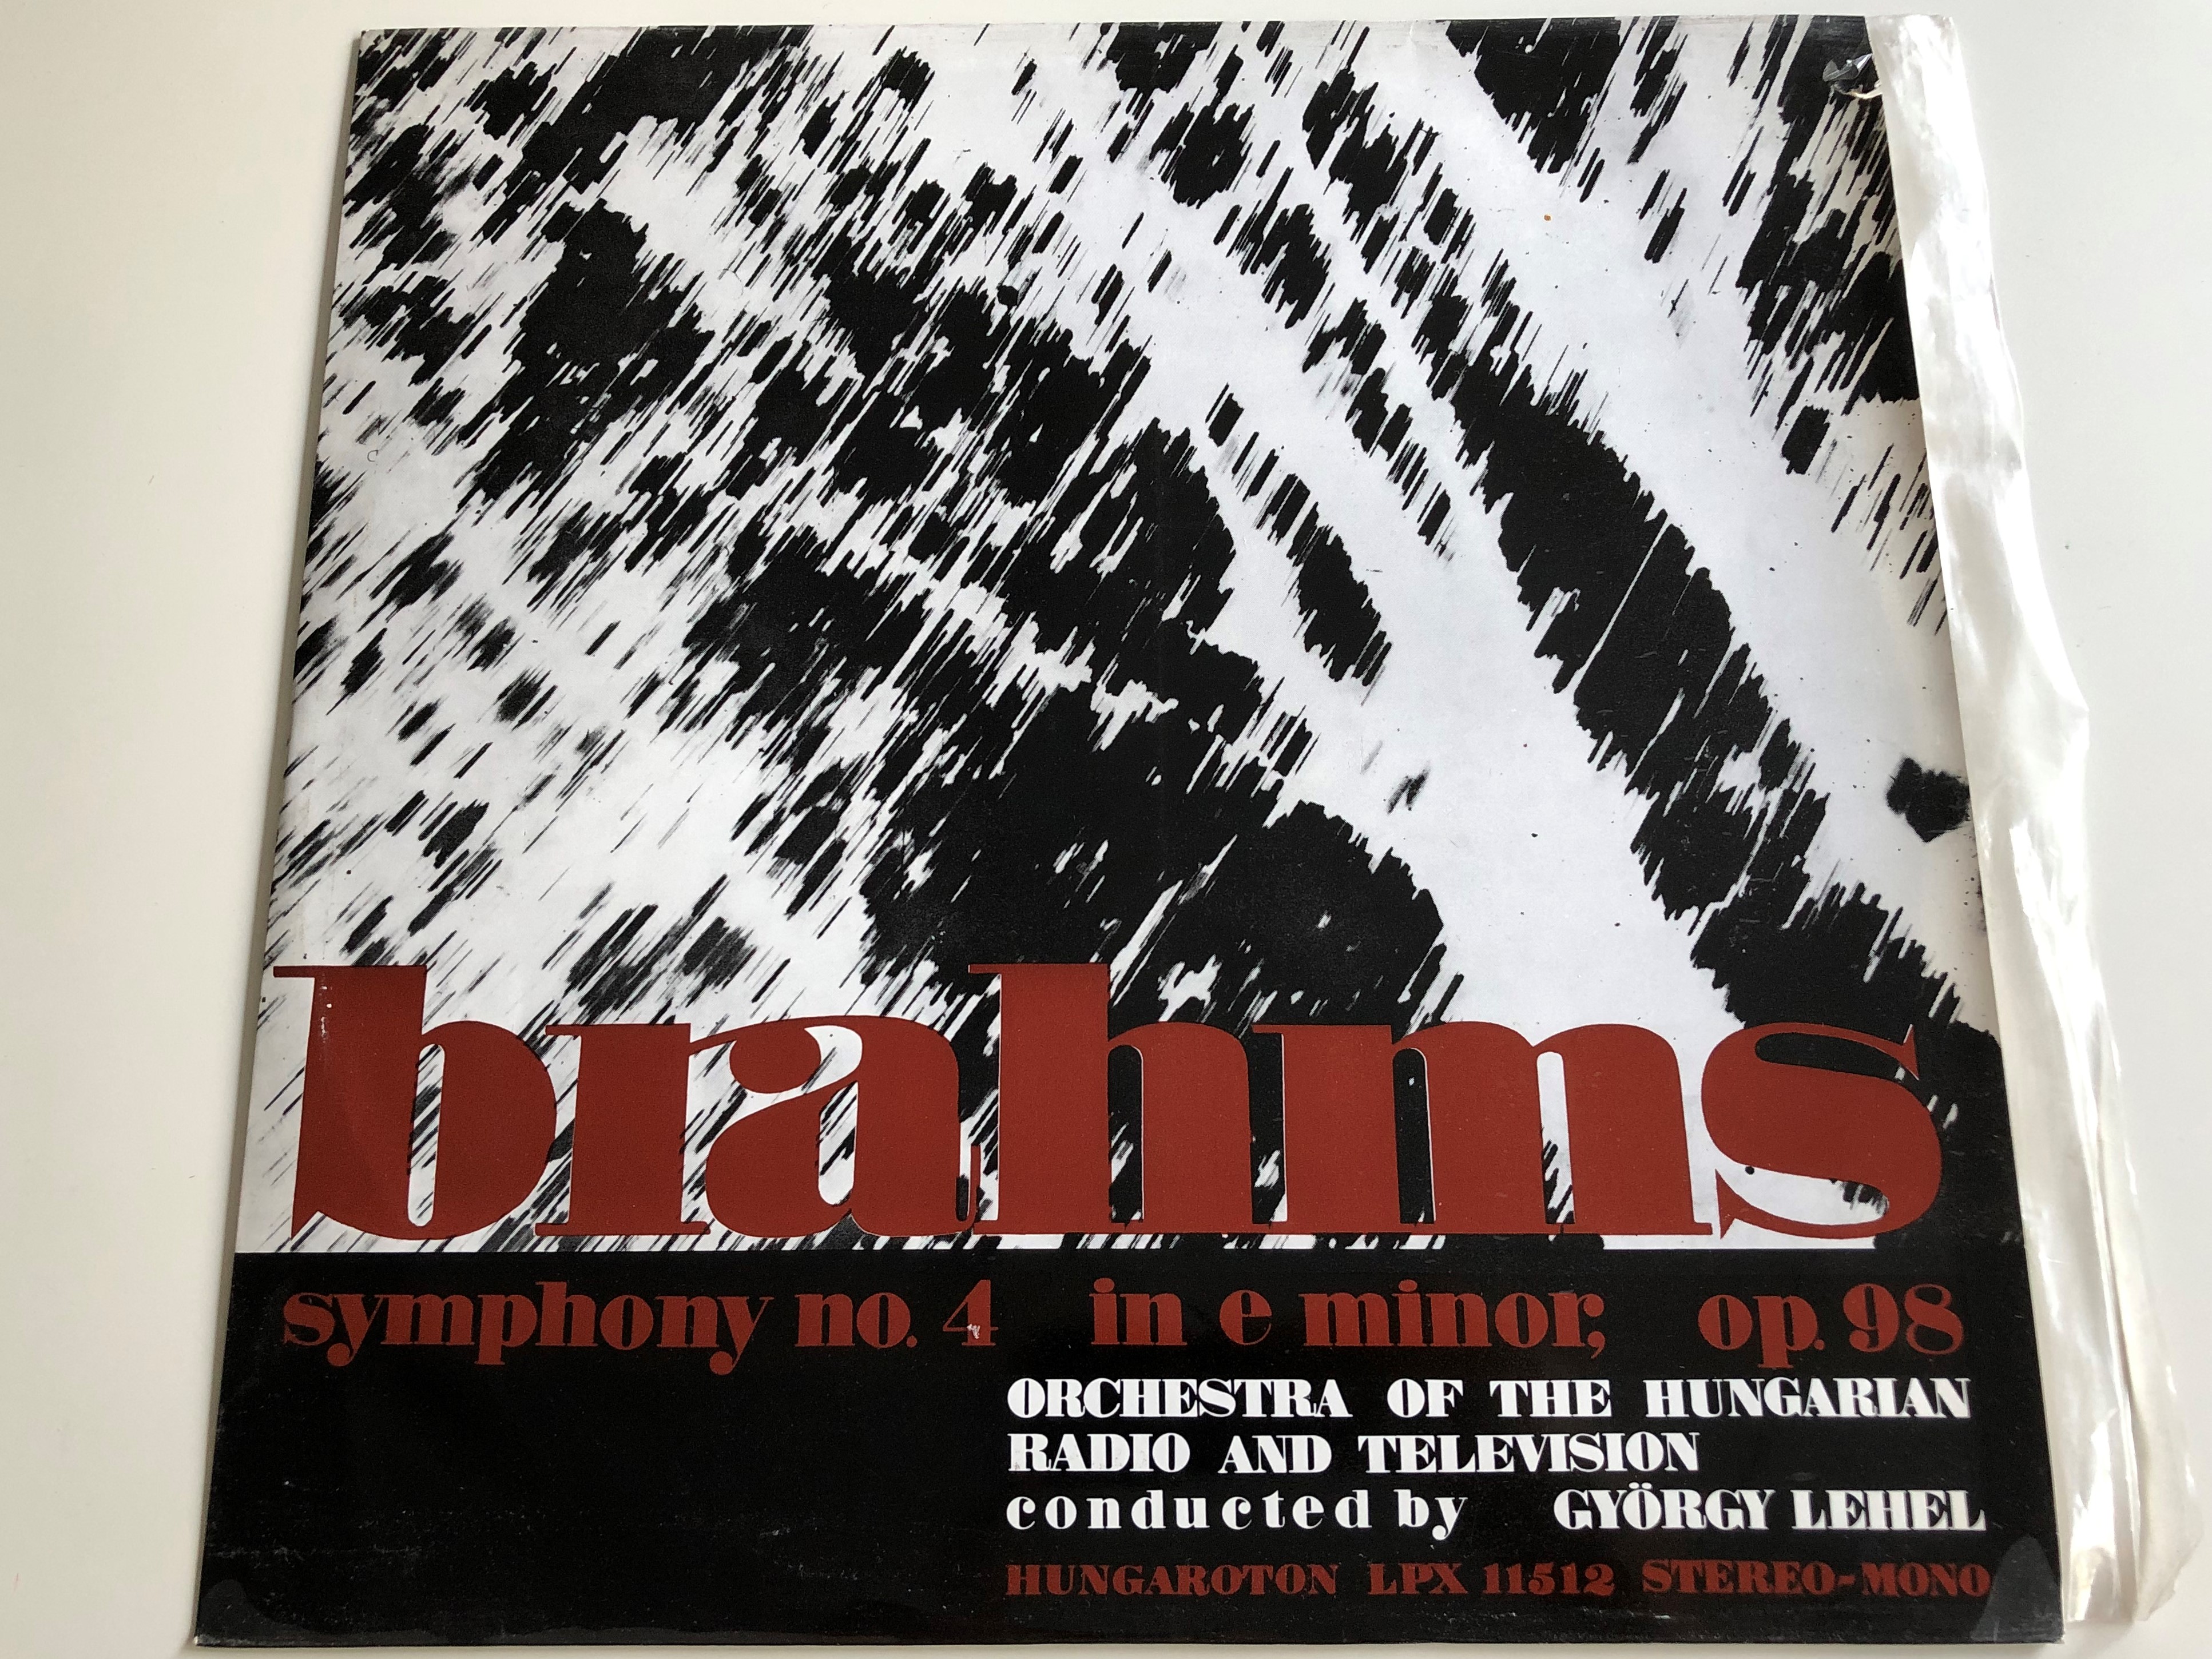 brahms-symphonie-no.-4-in-e-minor-op.-98-conducted-gy-rgy-lehel-orchestra-of-the-hungarian-radio-and-television-hungaroton-lp-stereo-mono-lpx-11512-1-.jpg